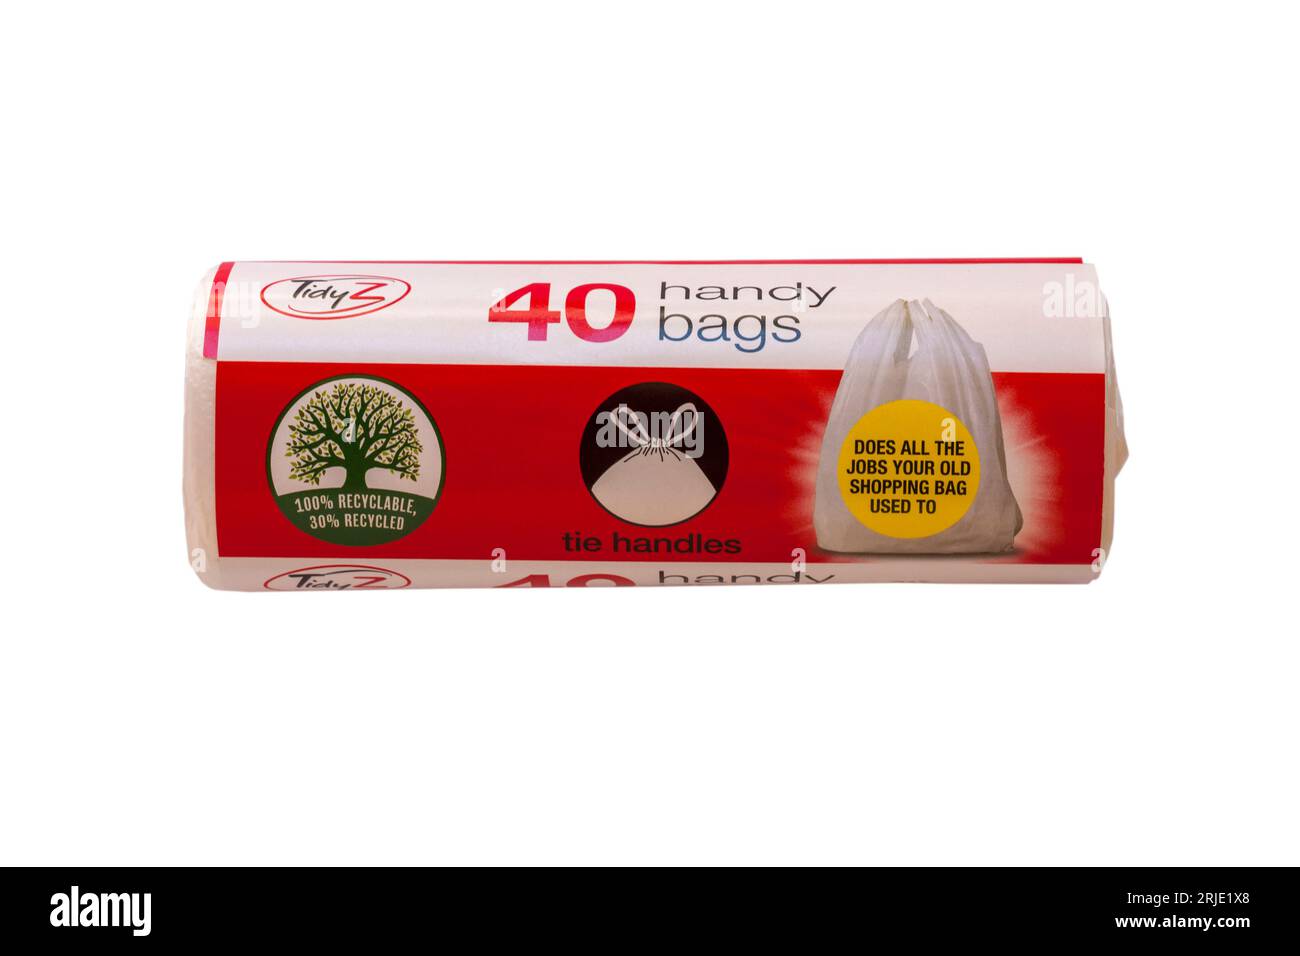 Roll of 40 handy bags from Tidyz isolated on white background - 100%  recyclable 30% recycled - does all the jobs your old shopping bag used to  Stock Photo - Alamy